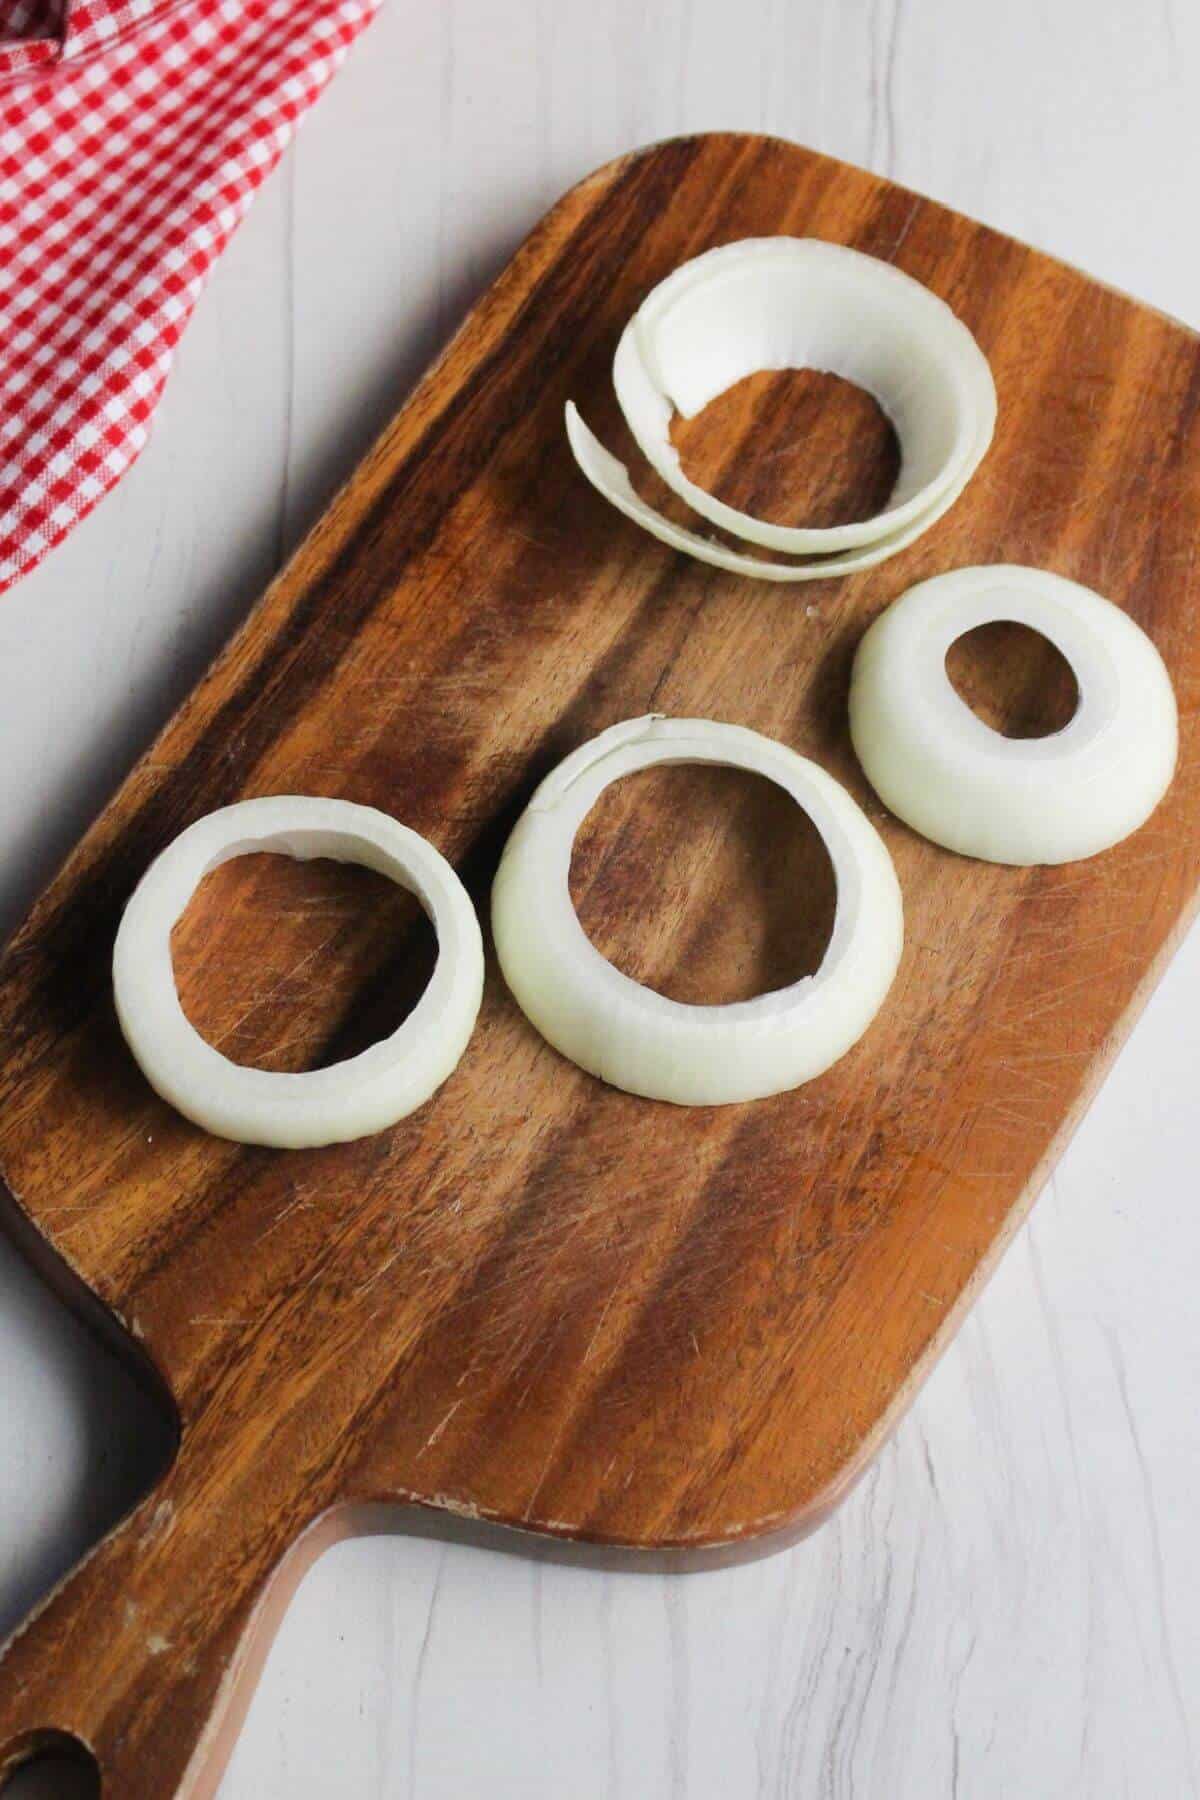 Onion sliced into rings on cutting board.